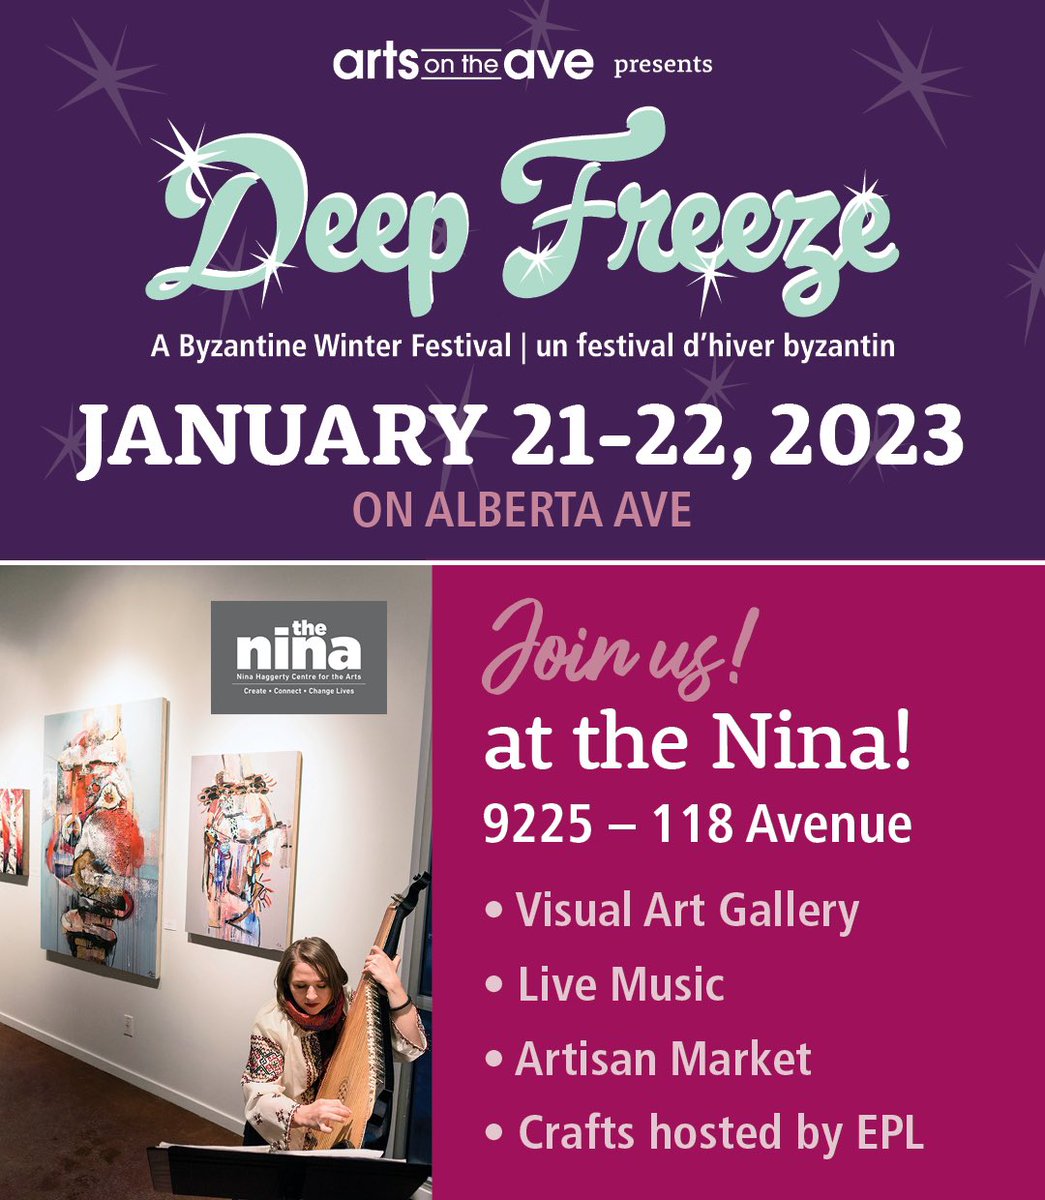 We are proud to be a venue for @DeepFreeze_Fest, presented by @artsontheave! 

Be sure to check out this wonderful winter festival this weekend on #AlbertaAvenue. Visit deepfreezefest.ca for more information.